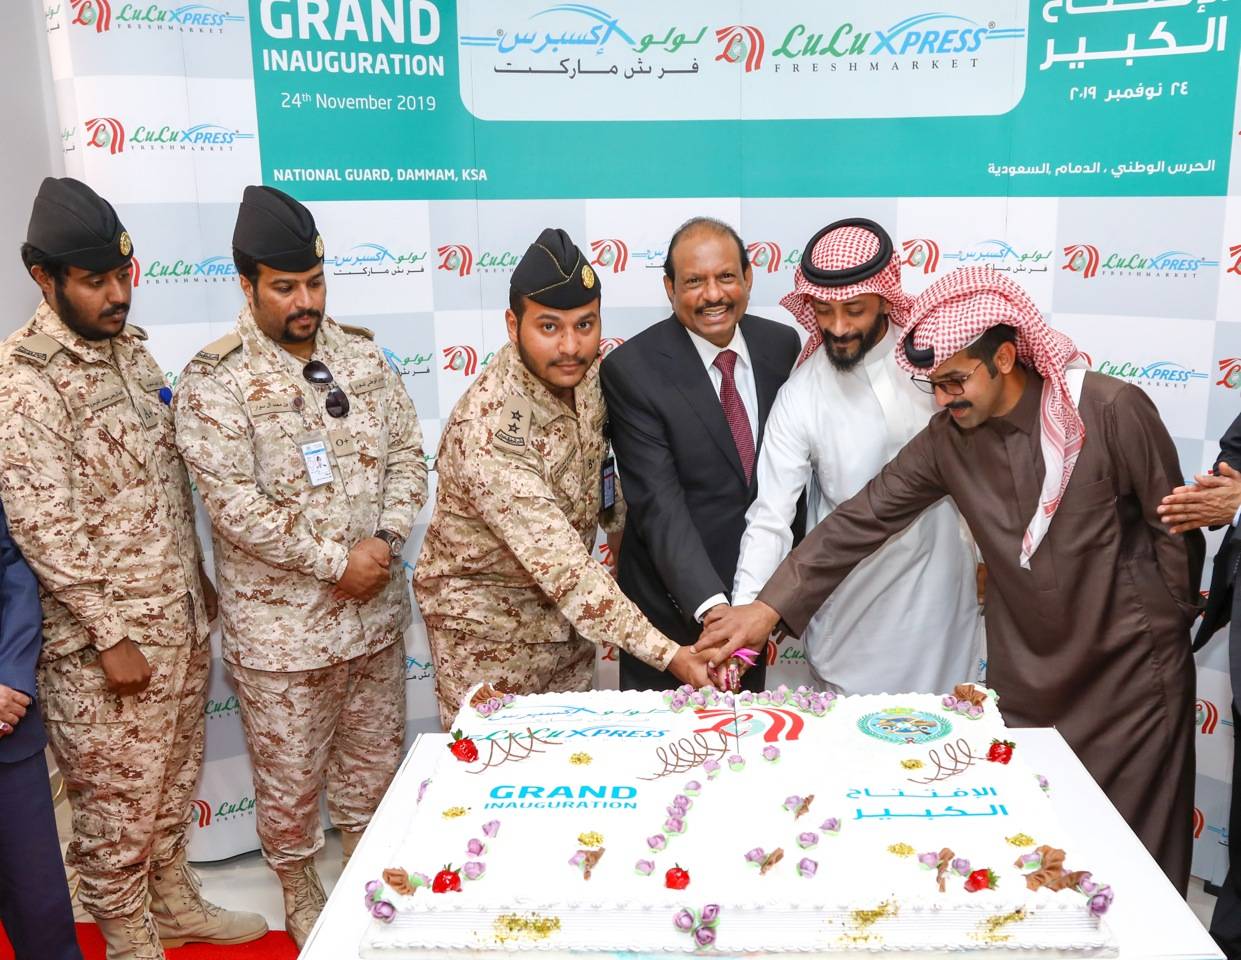 Eng. Aldugaim Fahad Saeed, Head of Housing National Guard, in the presence of Yusuff Ali M.A., Chairman and Managing Director of LuLu Group, government officials and LuLu dignitaries attendom 